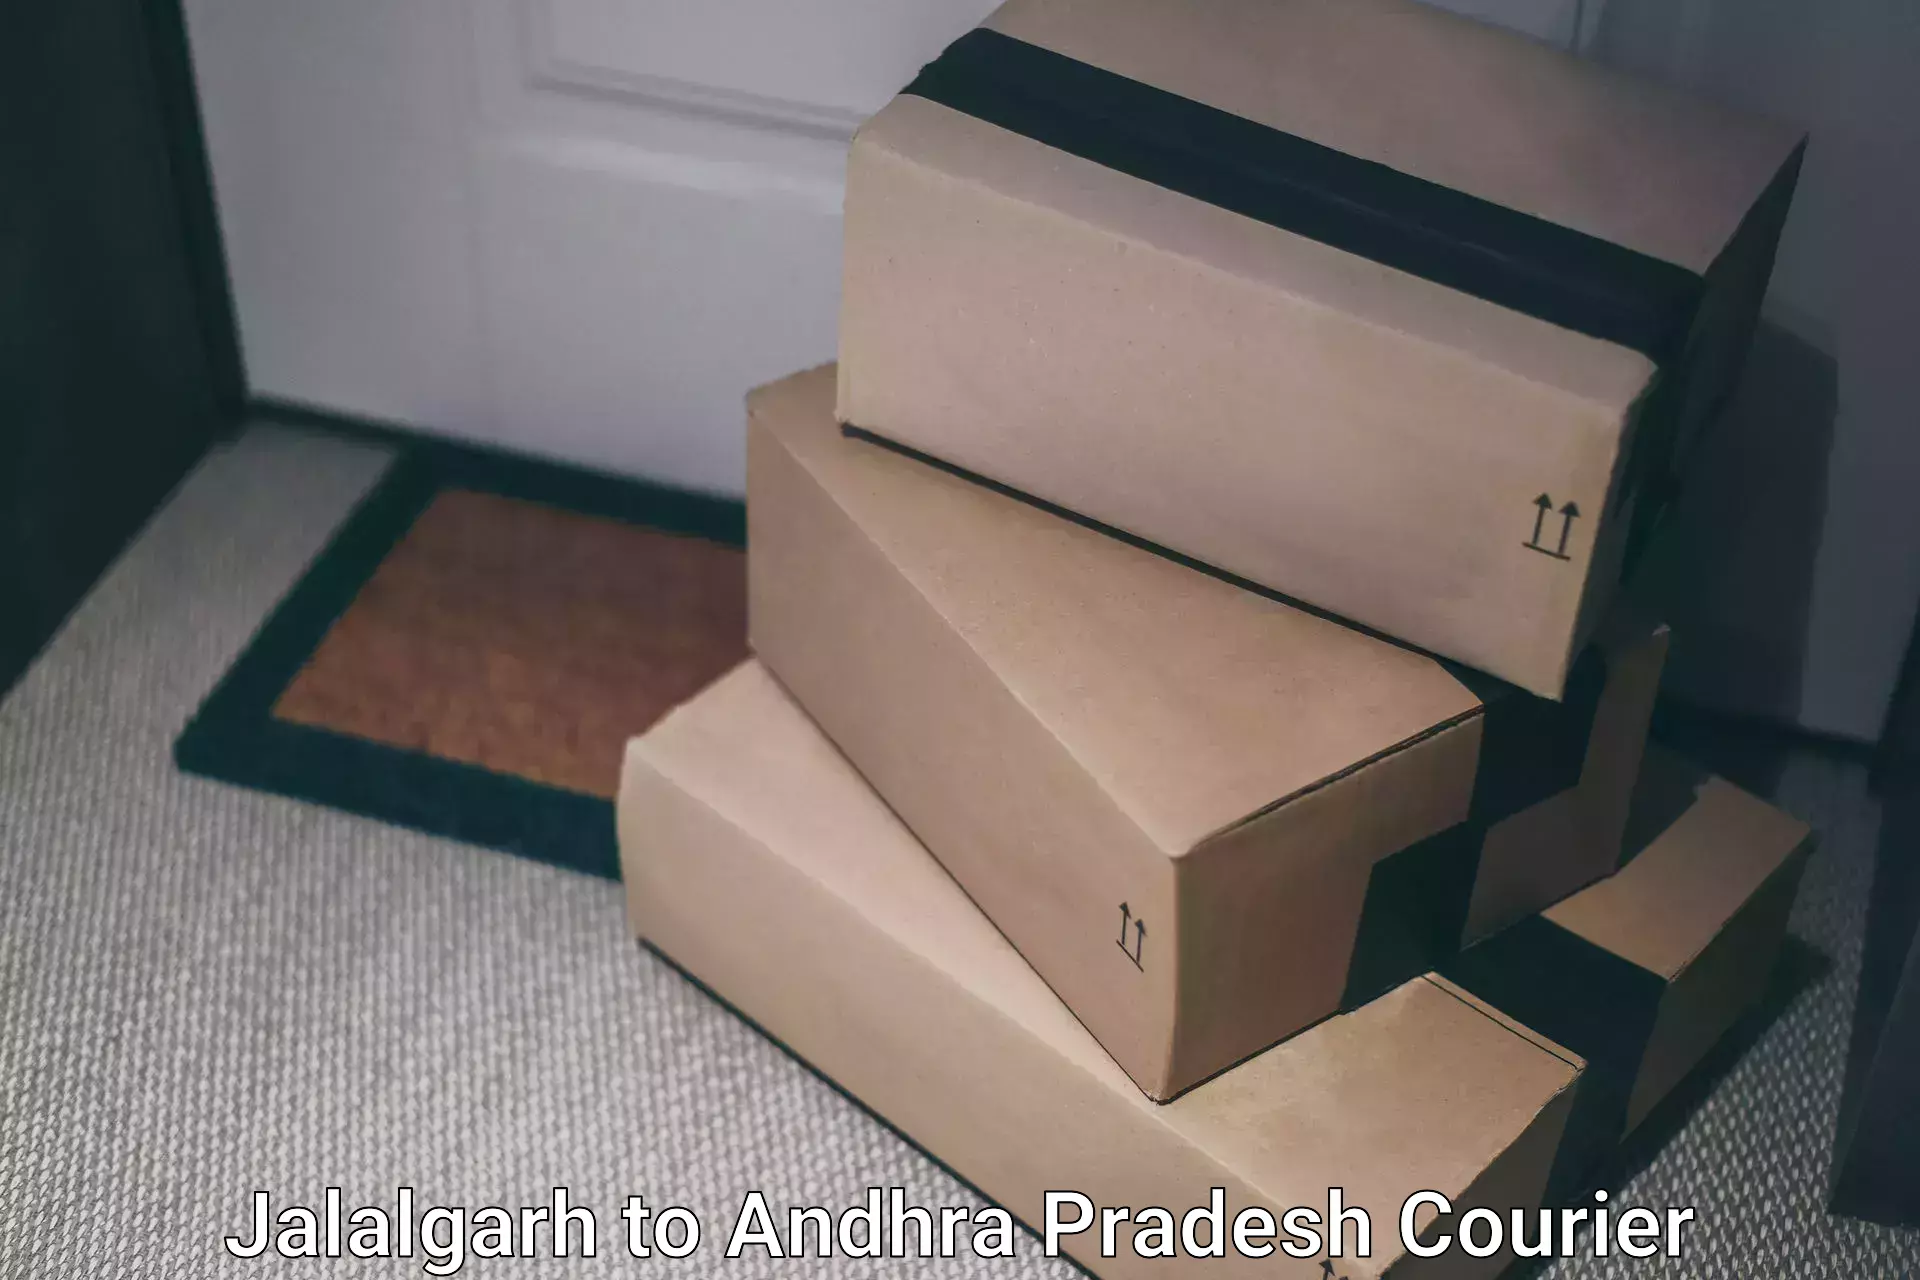 State-of-the-art courier technology Jalalgarh to Sattenapalle